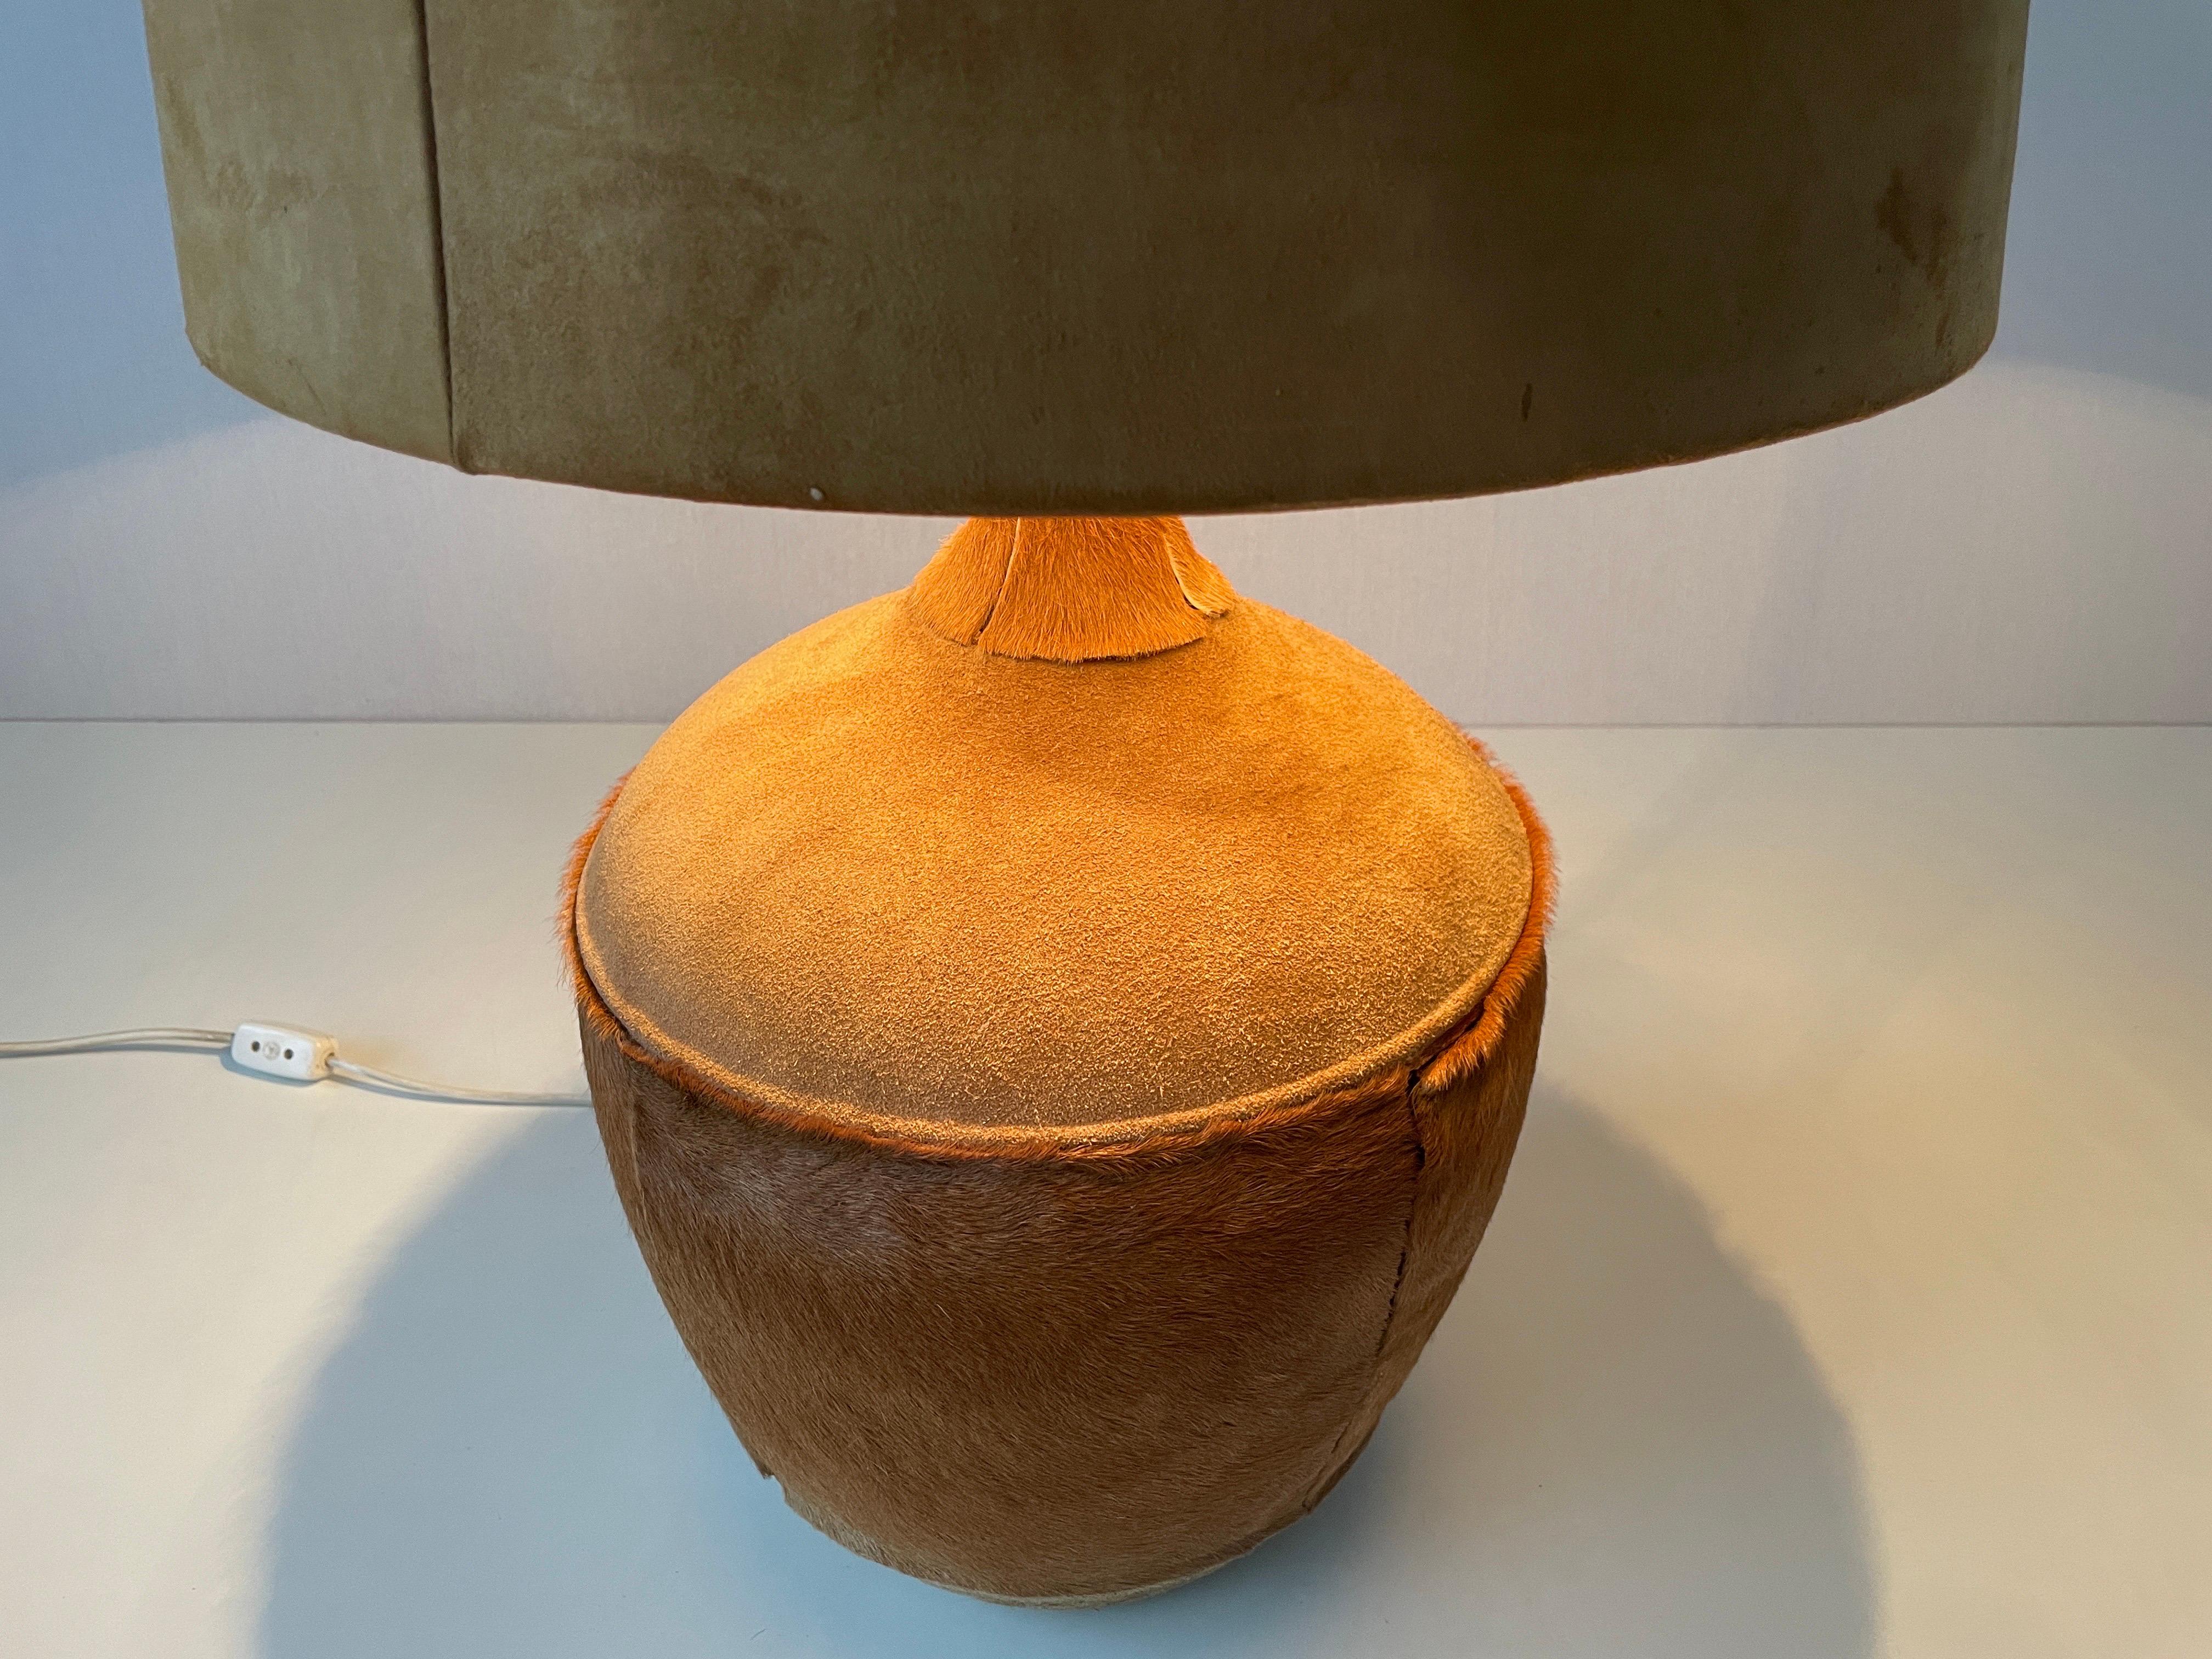 Tan Suede Leather and Glass Shade Floor or Table Lamp, 1960s, Denmark For Sale 11